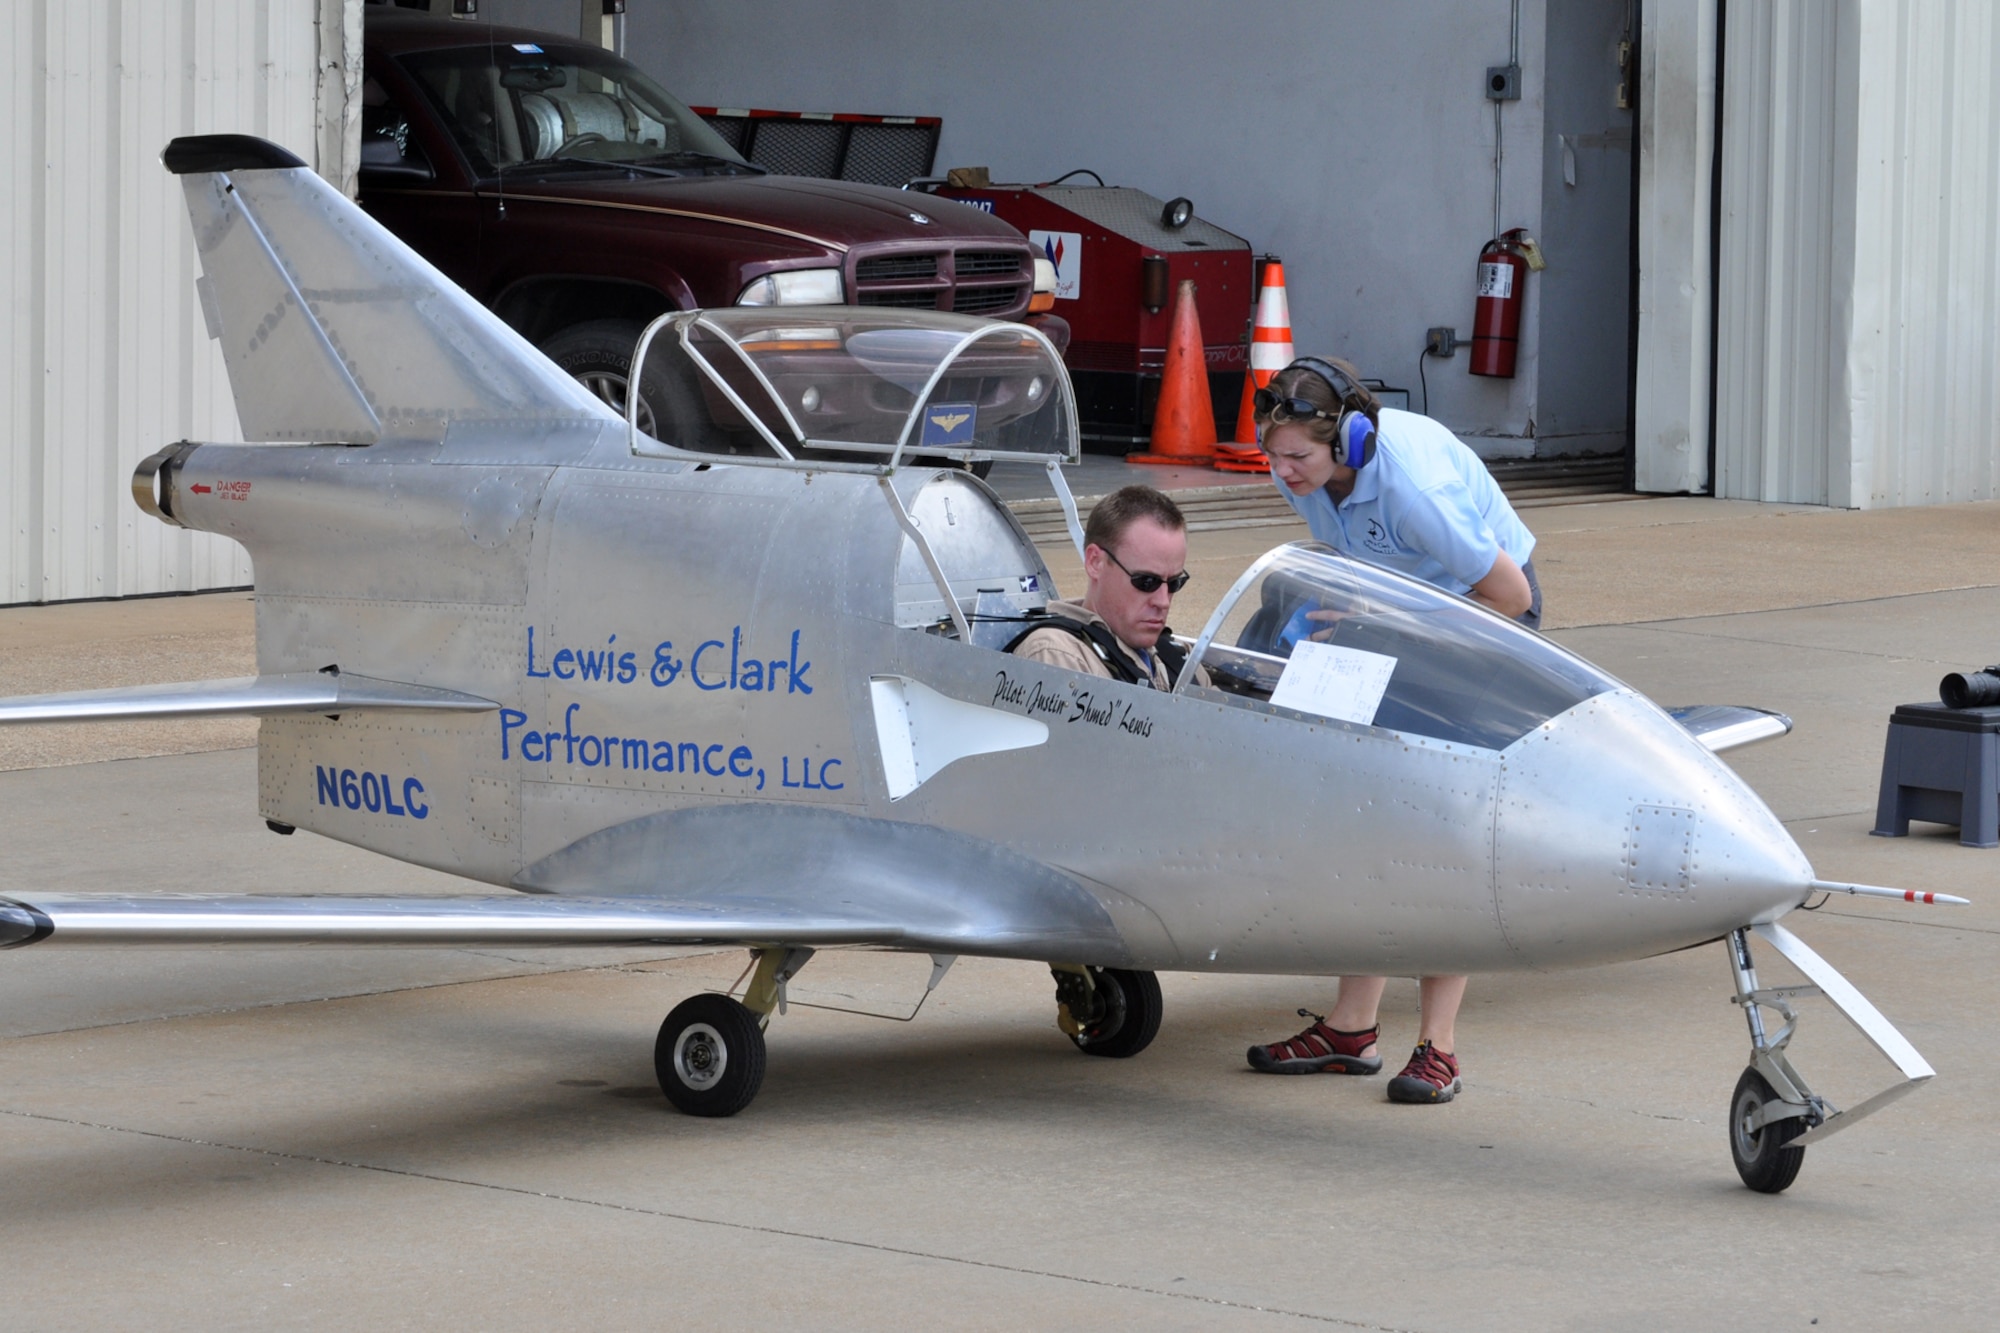 Justin “Shmed” Lewis, chief FLS Microjet pilot and team owner, prepares for takeoff with the assistance of his wife Sarah at the “Wings Over Tyler Air Show” at the Tyler Pounds Regional Airport in Tyler, Texas, July 3, 2011. Since its conception in the 1970s, “The World’s Smallest Jet” has been thrilling air show audiences all over the world. The FLS Microjet is a high performance, aerobatic, single seat, low-wing, all metal, Jet powered aircraft built from an amateur homebuilder kit. (U.S. Air Force photo/Tech. Sgt. Jeff Walston)